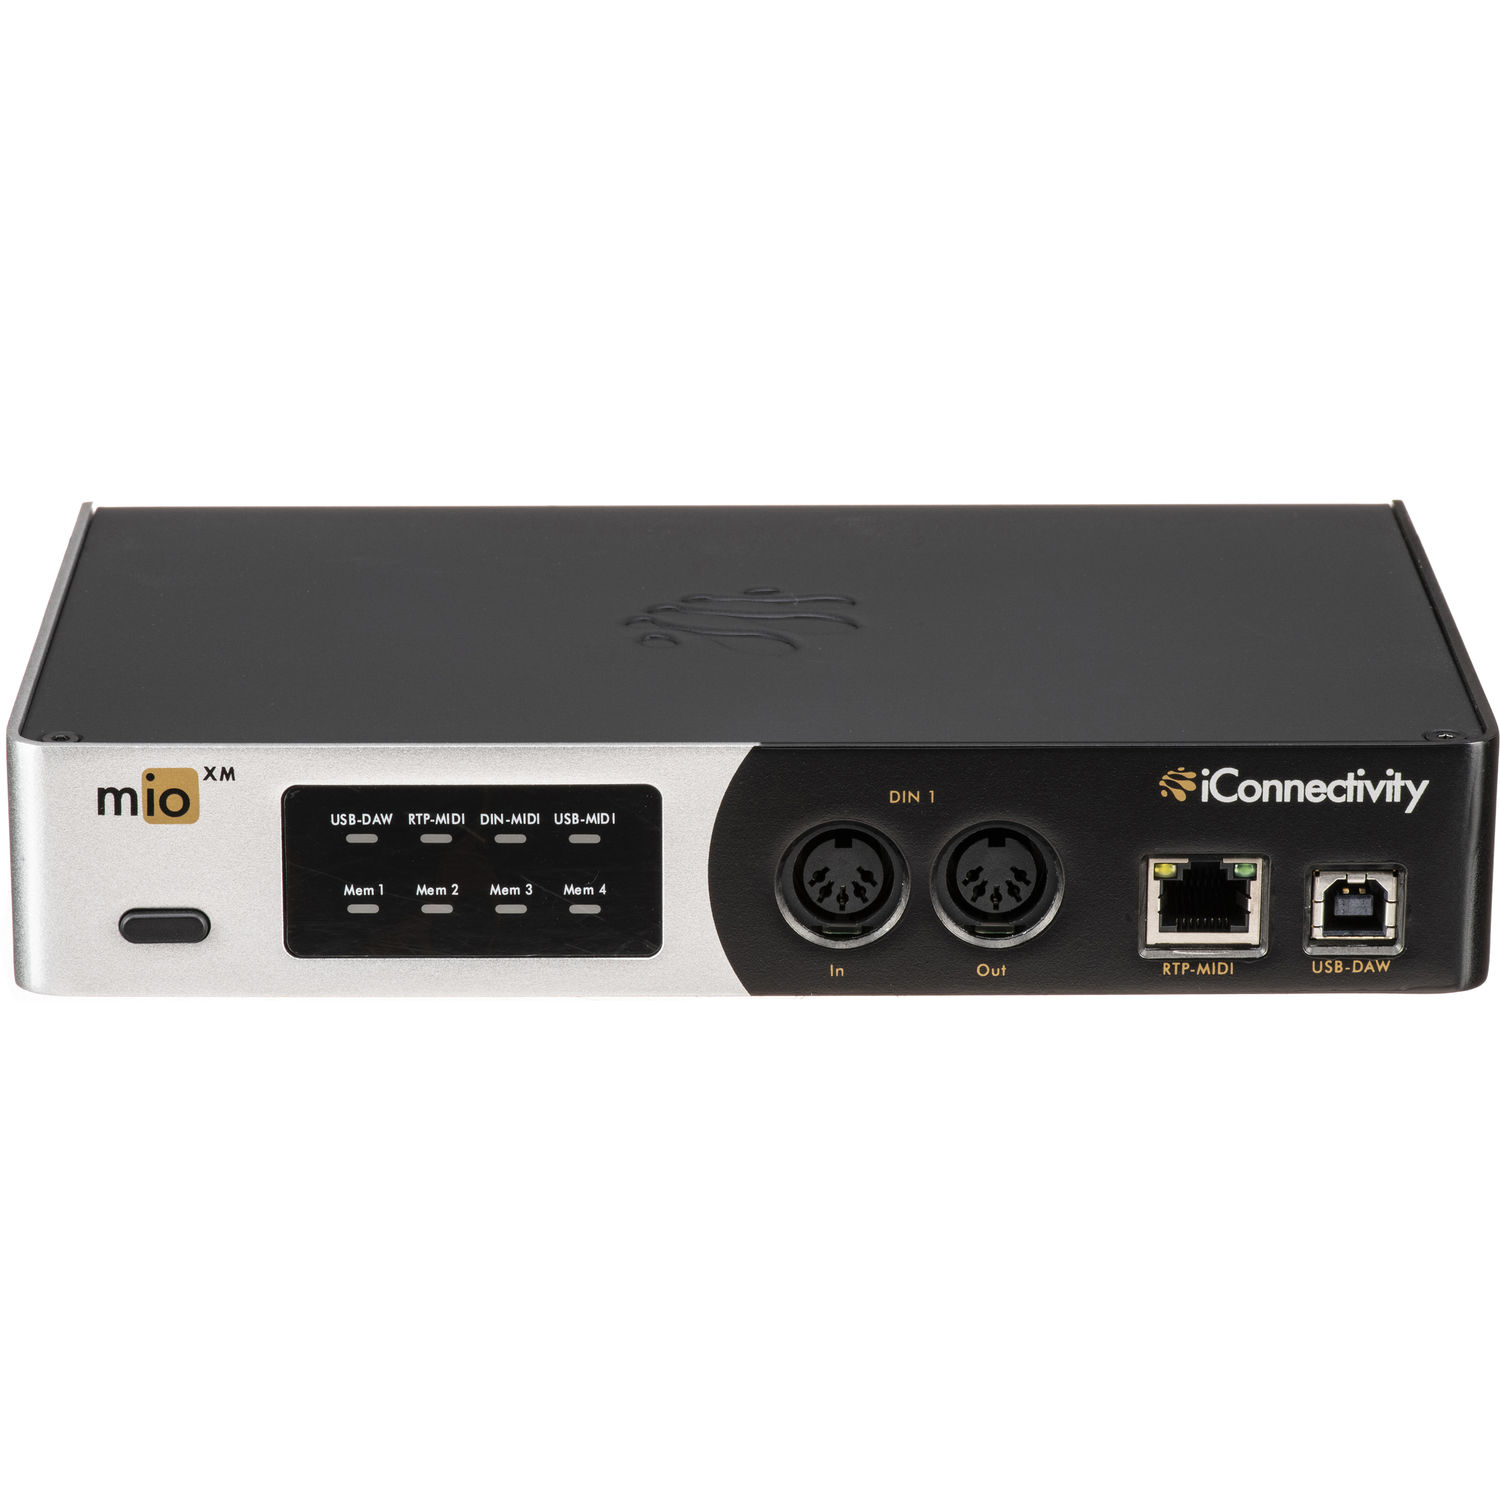 Iconnectivity Mioxm 12 Port Ethernet Midi Interface And Mioxm